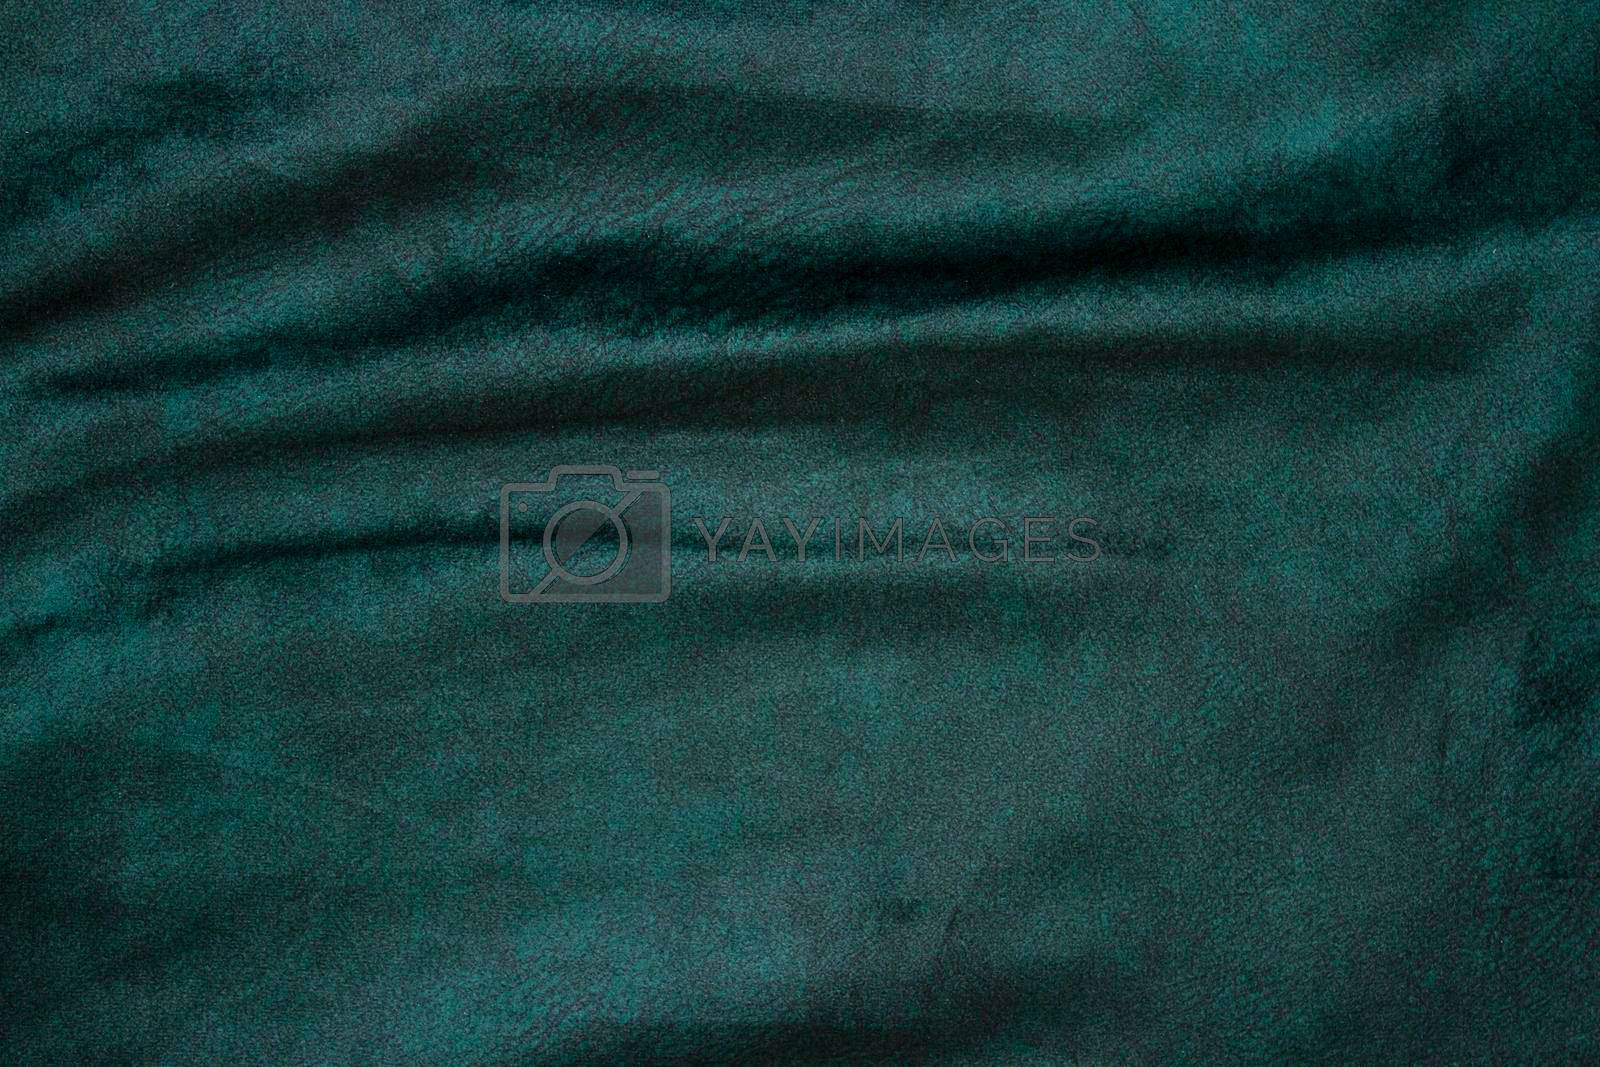 Royalty free image of velour fabric texture, background, green. Velvet velour cloth background with glowing light and dark shadows. Background for theater and fashion design themes by Hitachin